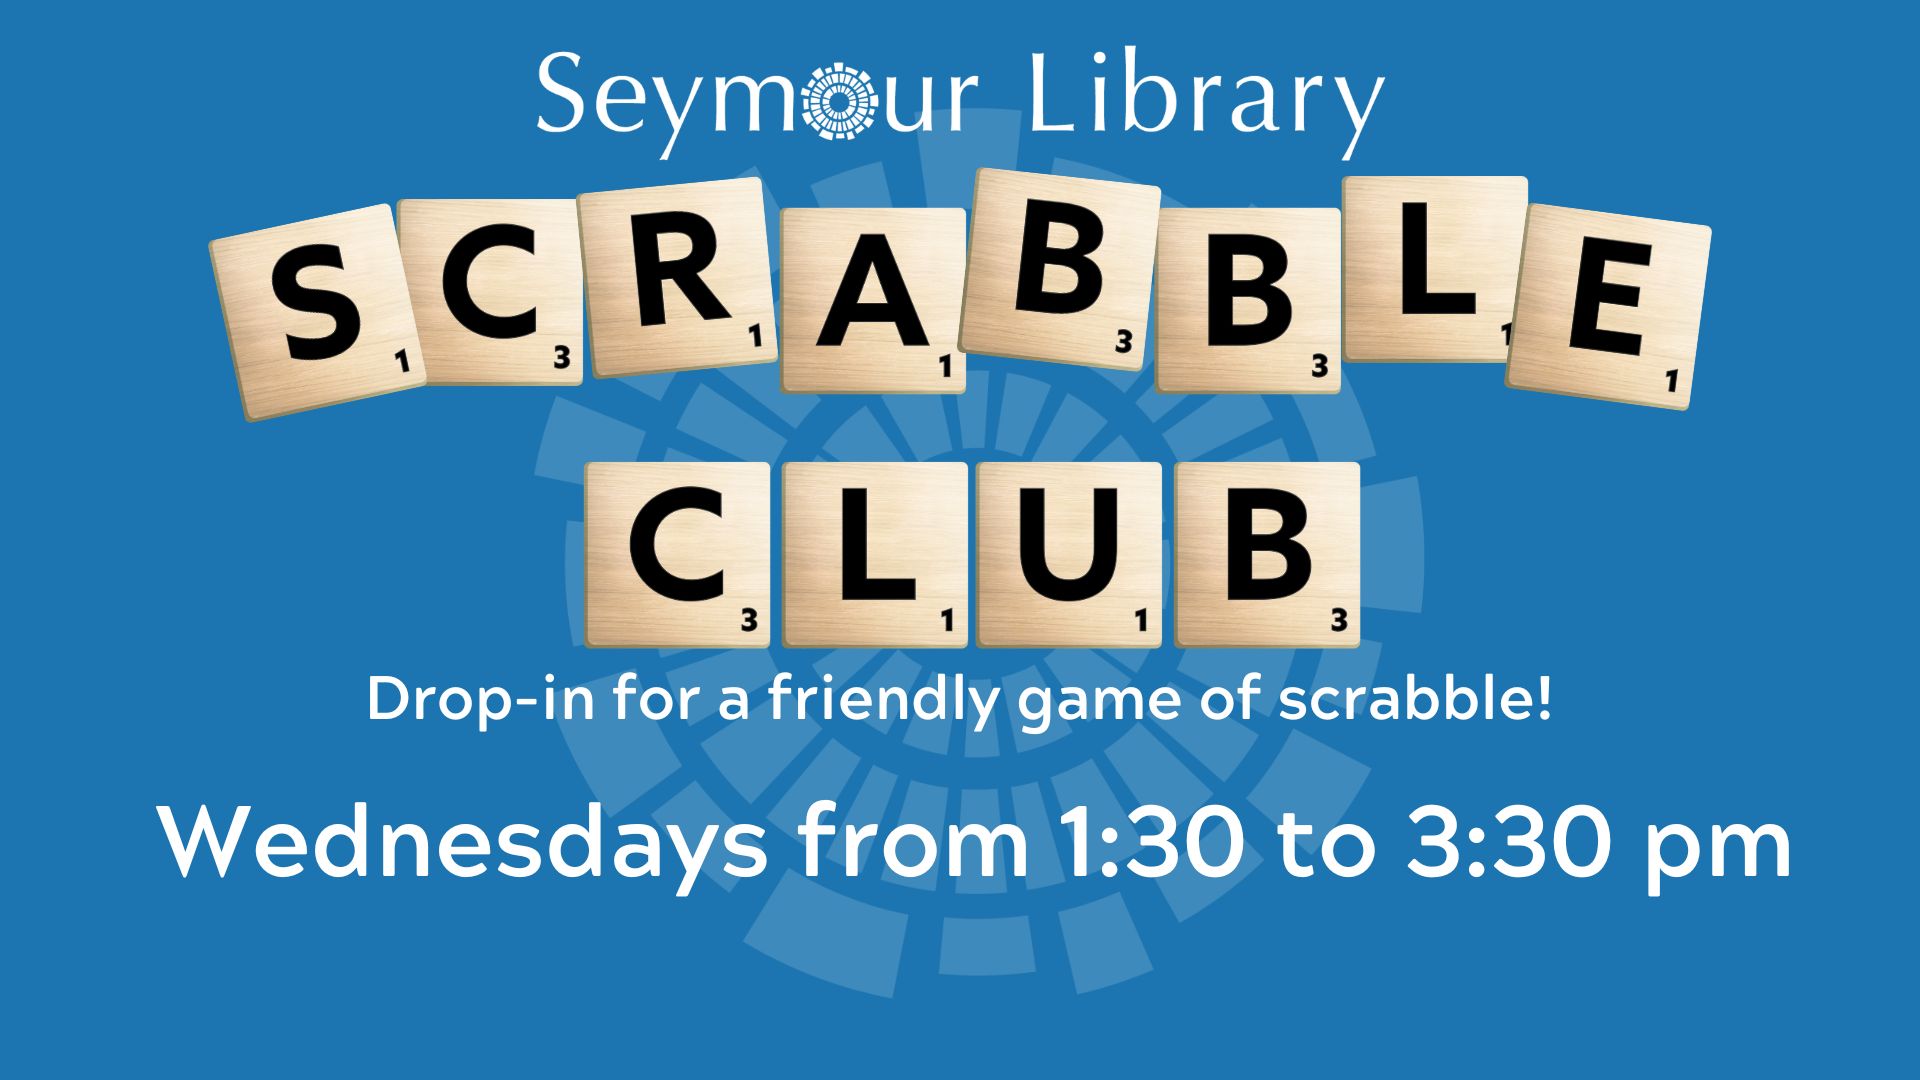 Seymour Library Scrabble Club Wednesdays at 1:30 pm - graphic with blue background and scrabble tiles.